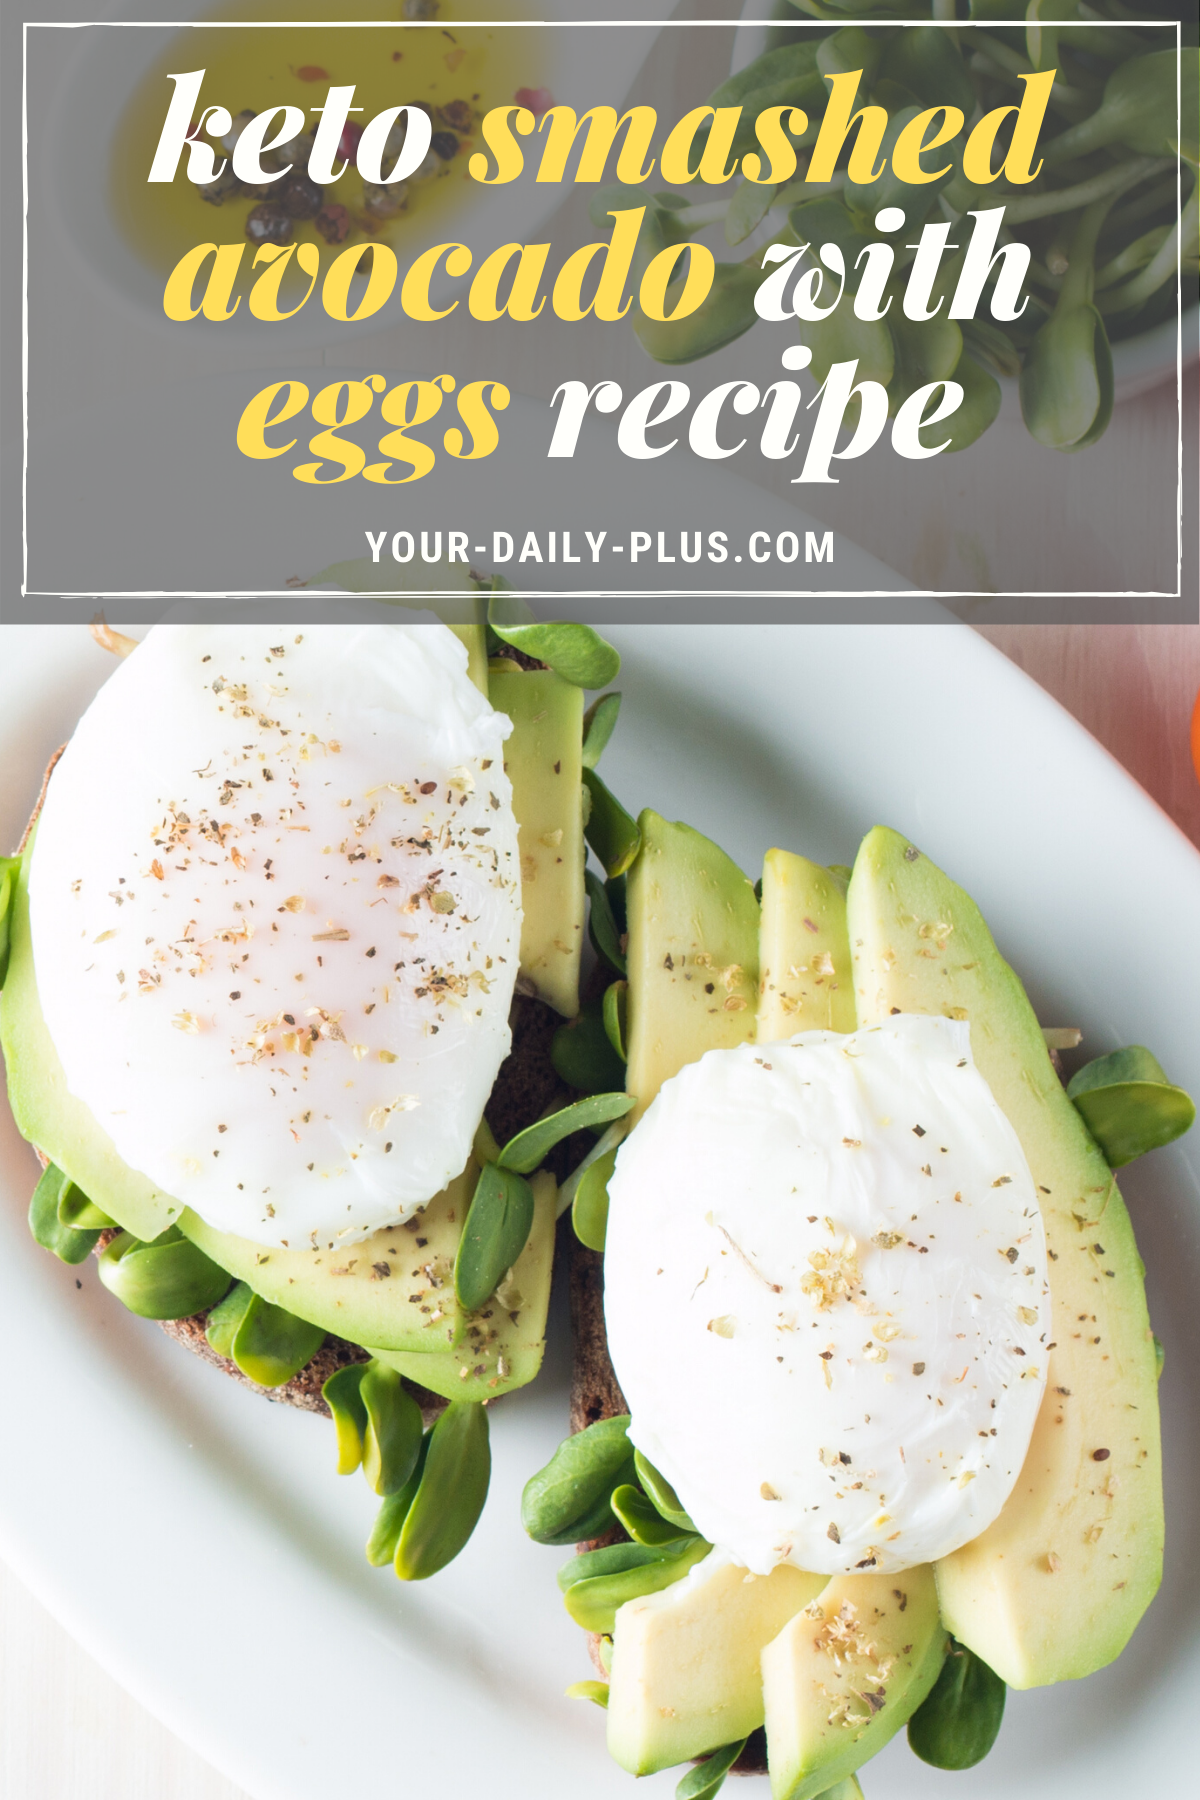 This is such a simple and delicious breakfast to make, and one you really can’t get tired of eating. And although it is simple with just a few ingredients, you’re going to find the combination of heart-healthy fats in avocado along with nutrient-dense eggs is going to keep you super-satiated throughout your morning. #ketobreakfast #lowcarbdiet #ketodiet